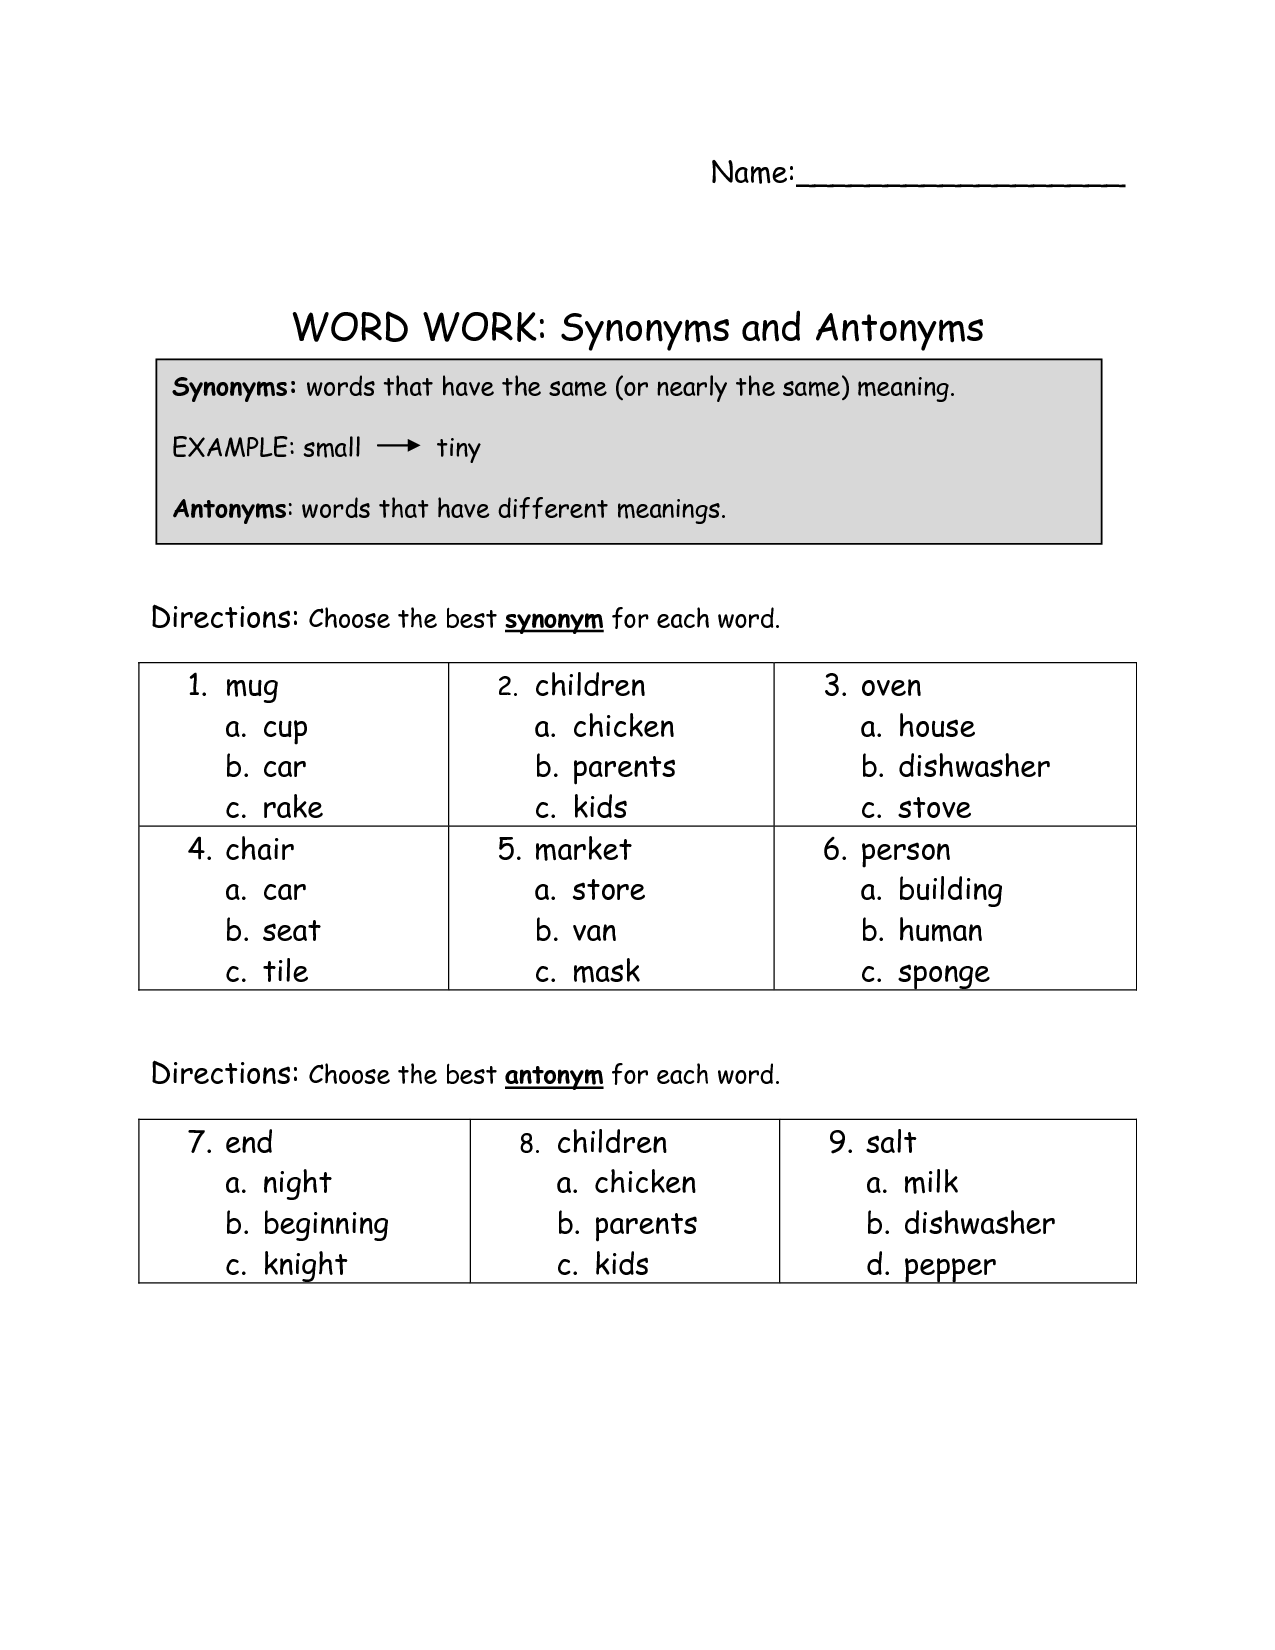 Synonyms and Antonyms Worksheets 3rd Grade Image